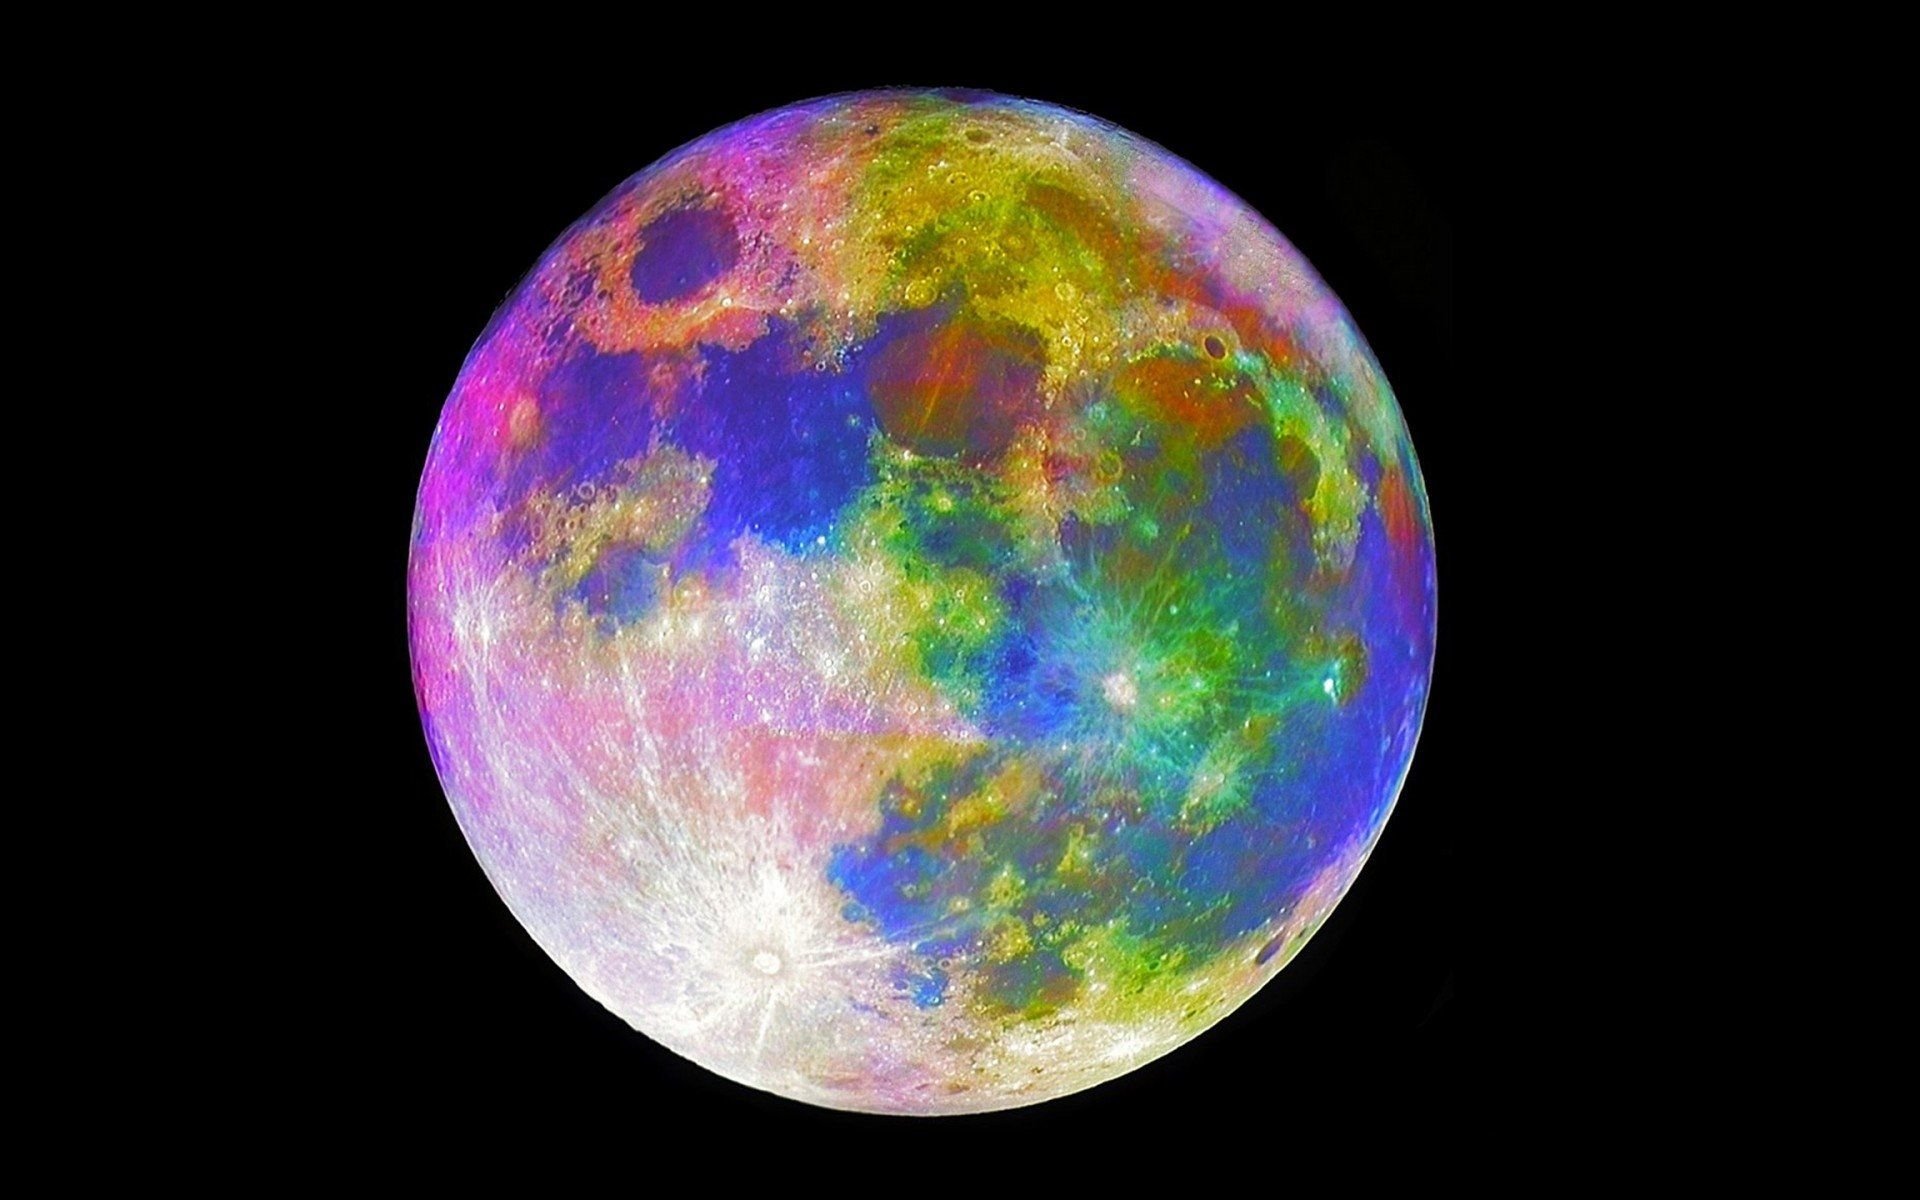 Colorful Moon Wallpaper Free Colorful Moon Background